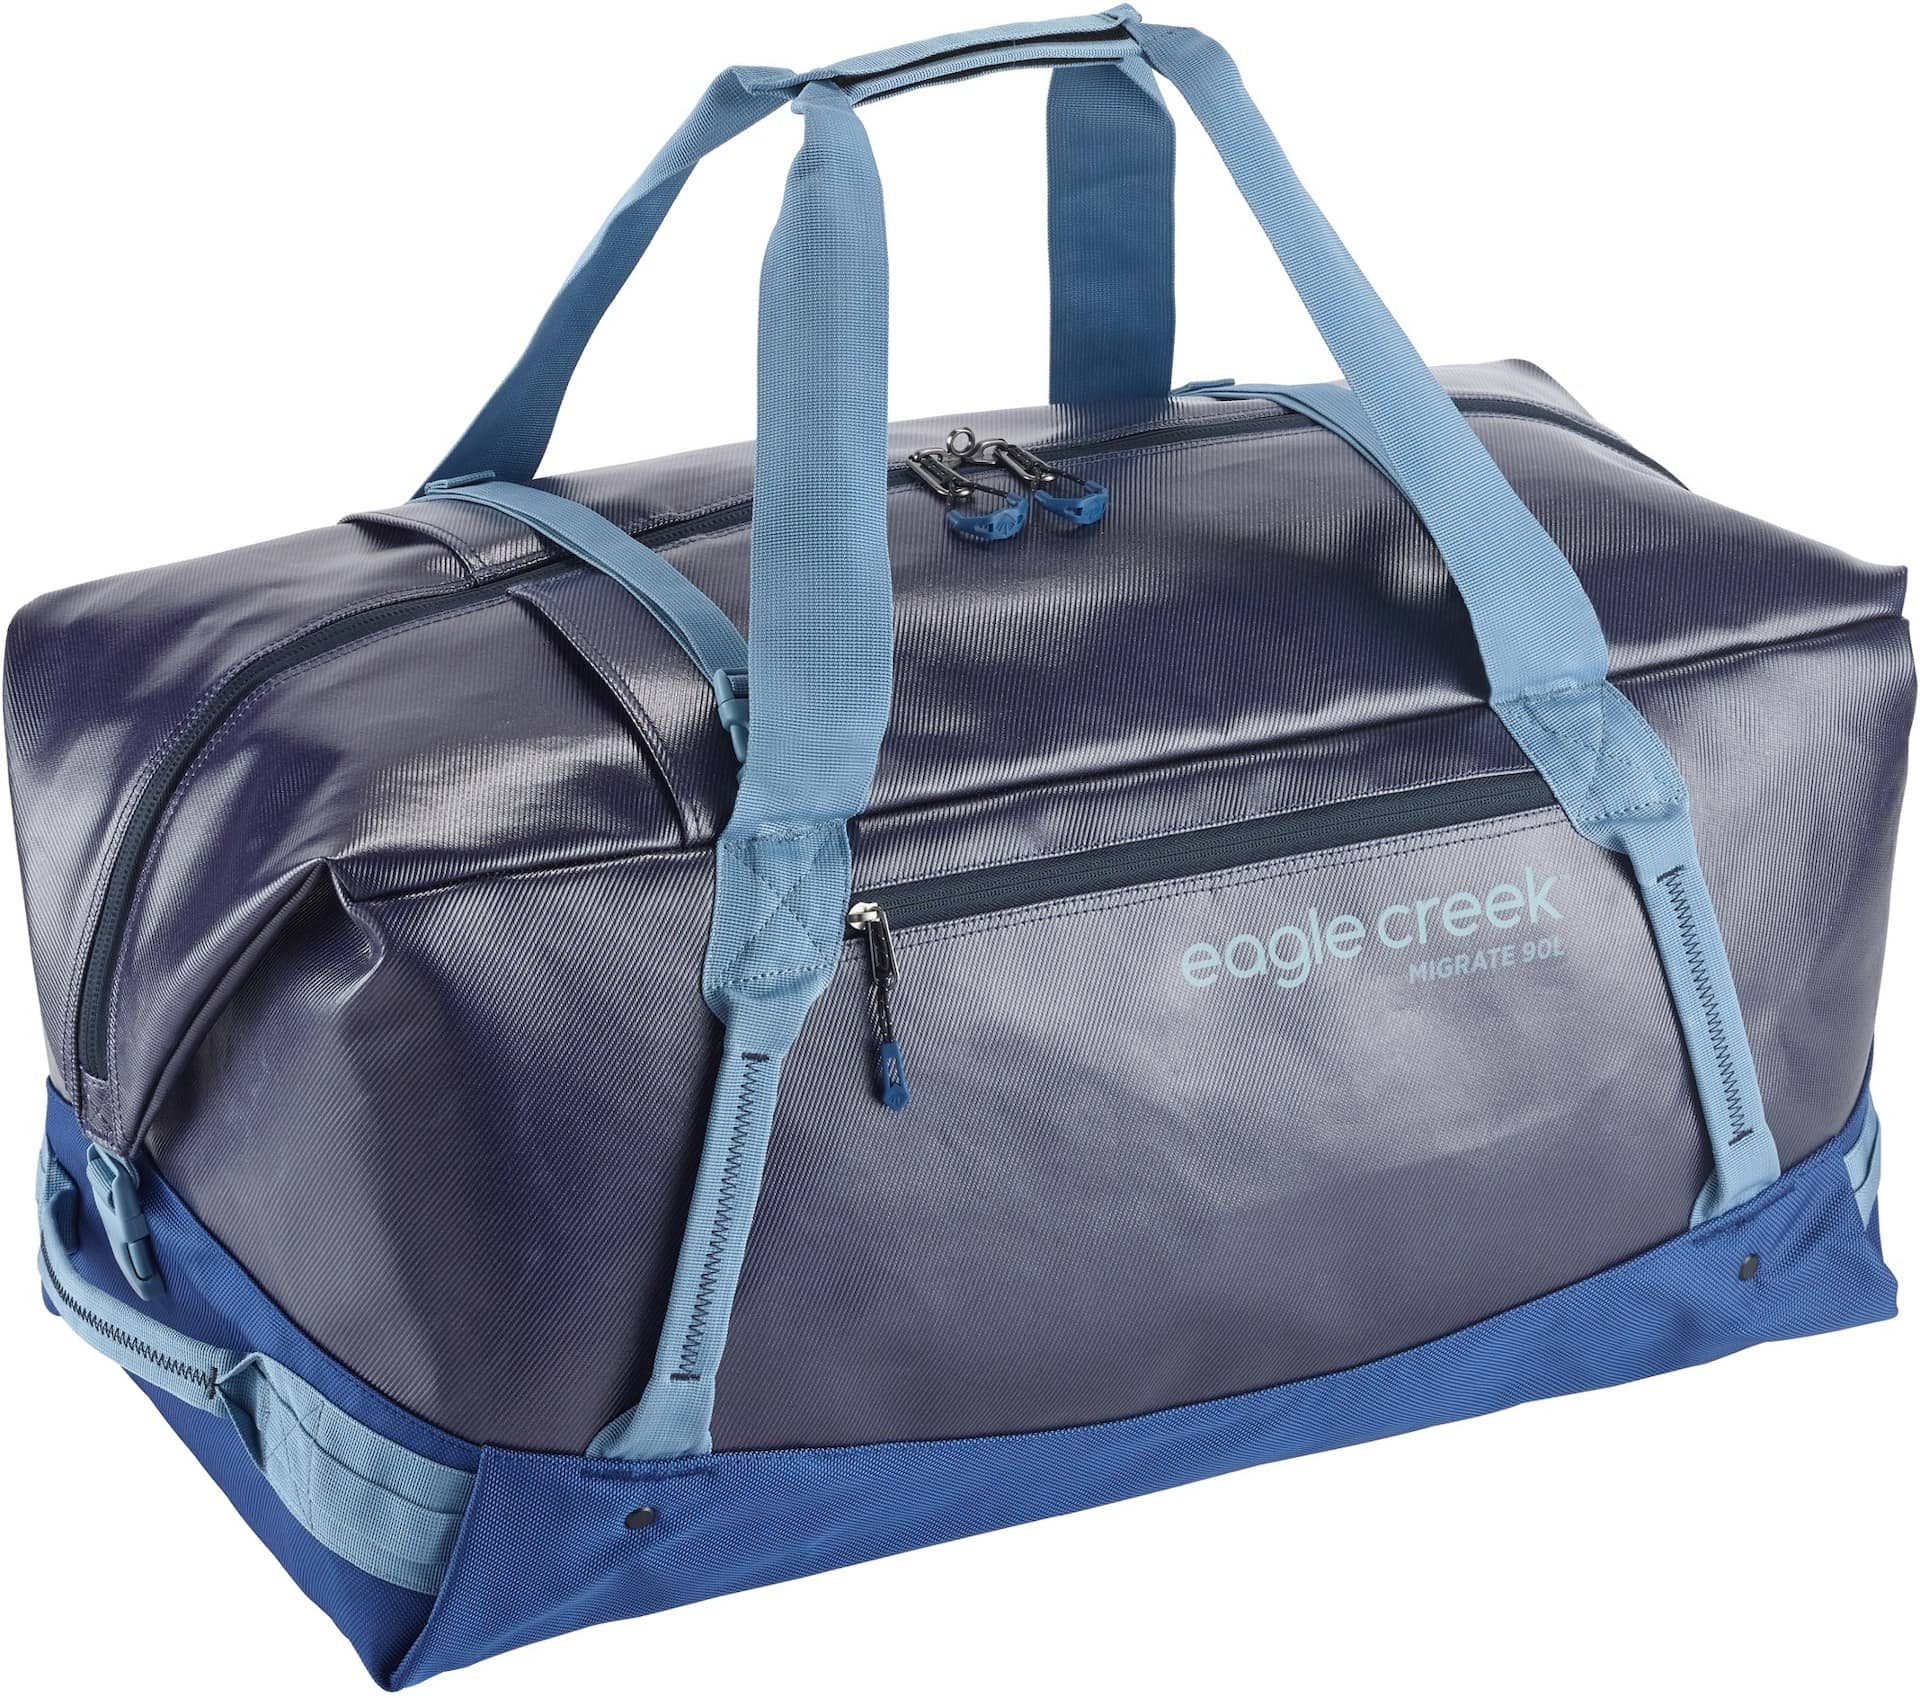 Is a Duffle Bag Considered a Carry On - Eagle Creek Migrate Duffel - 90 Liters